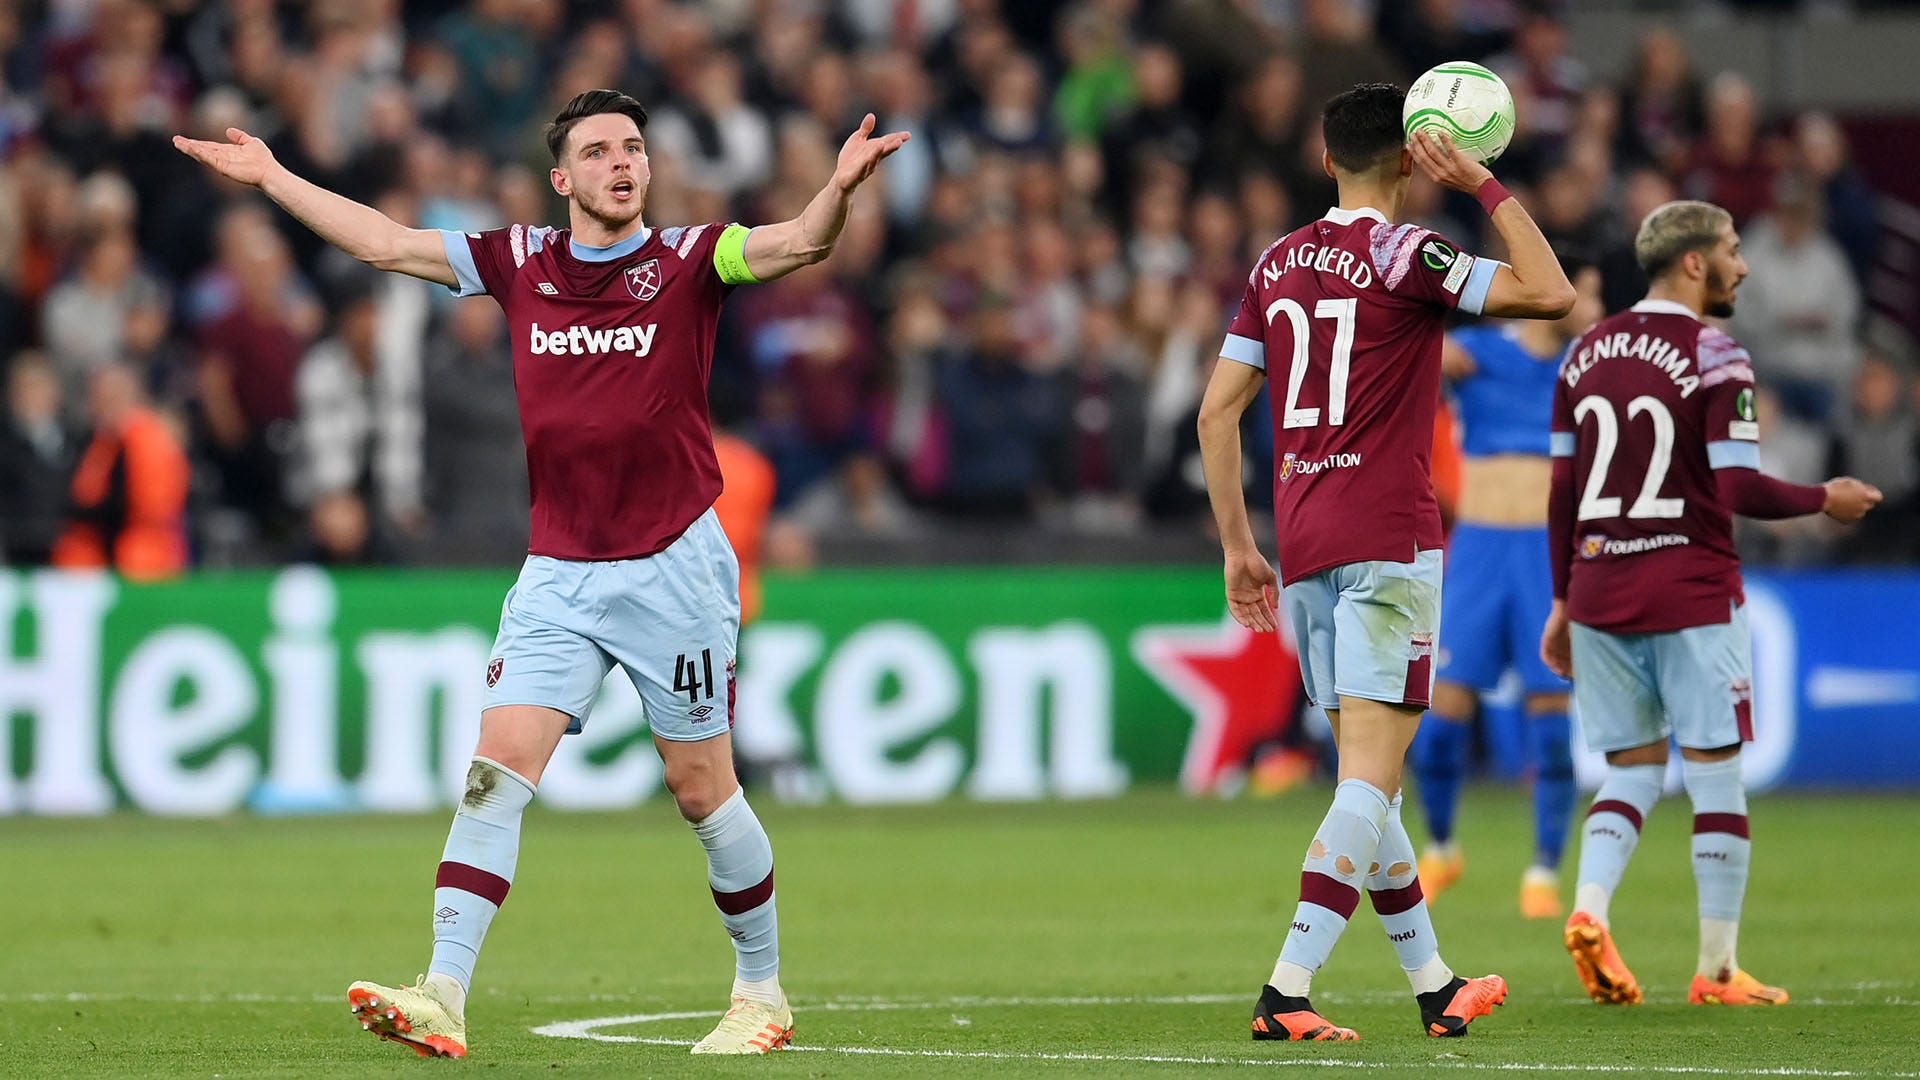 West Ham vs Leeds Where to watch the match online, live stream, TV channels, and kick-off time Goal US